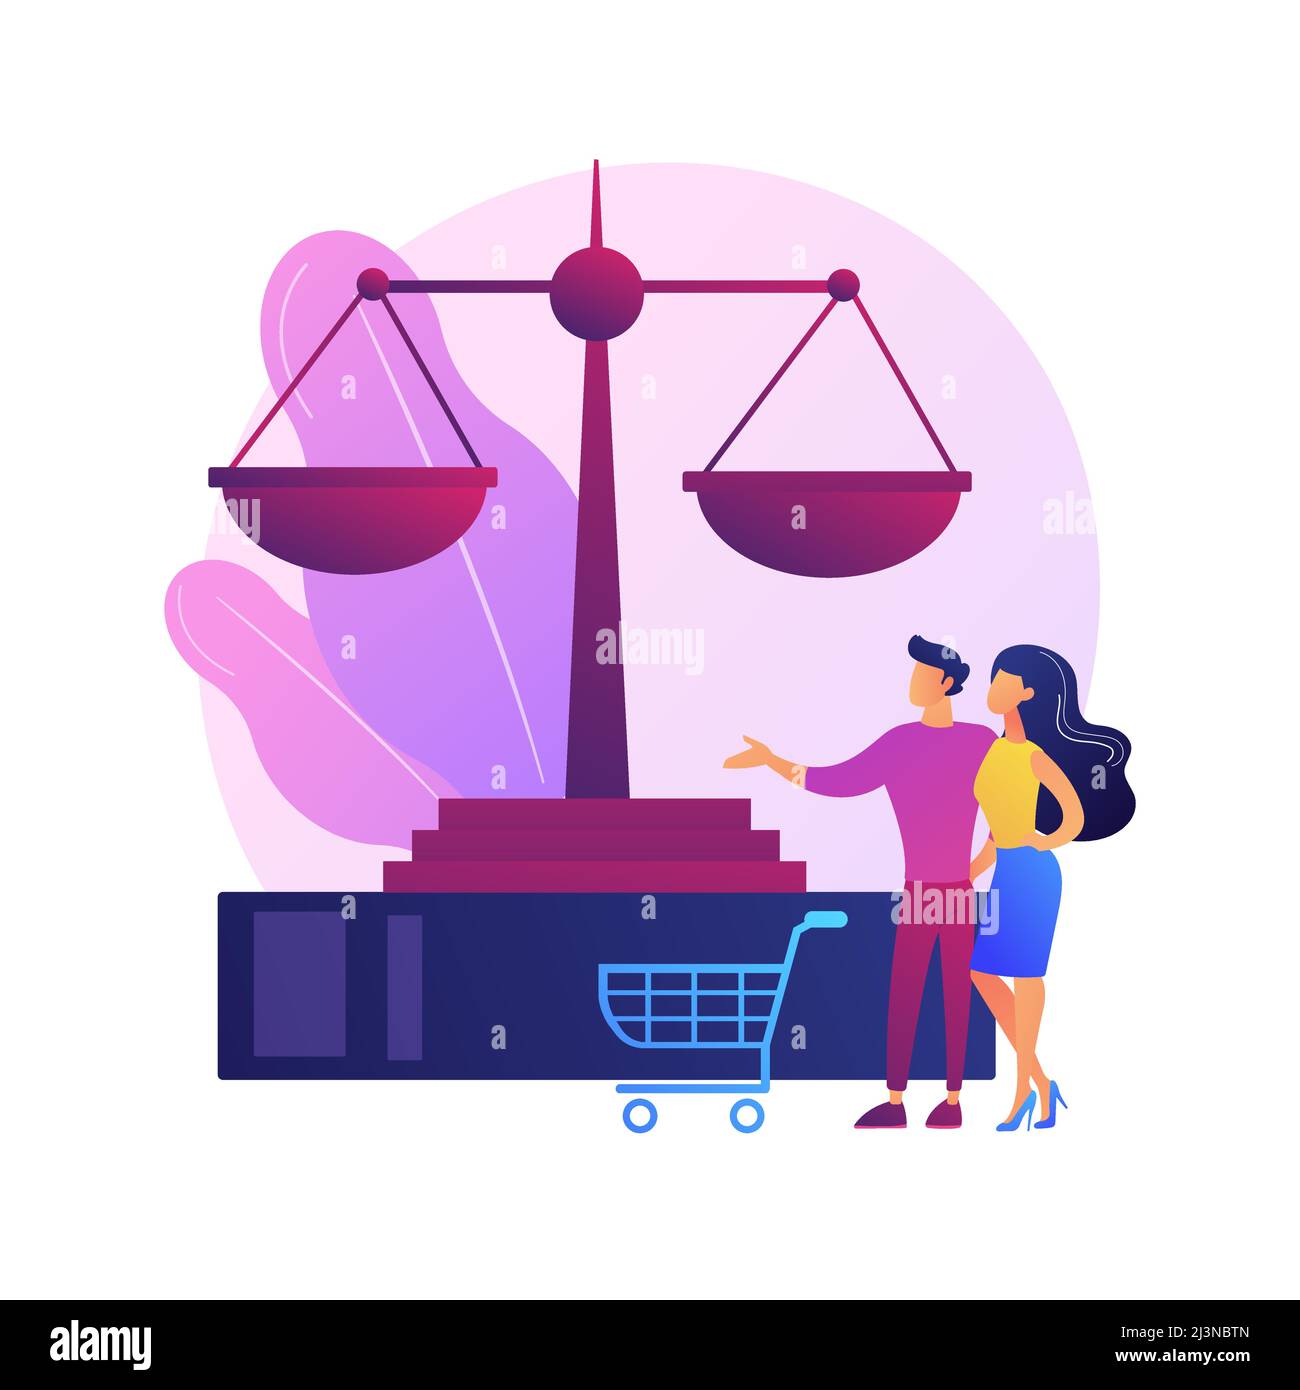 Consumer law abstract concept vector illustration. Consumer litigation, legal protection service, law firm, judicial agreement, replacement of faulty Stock Vector